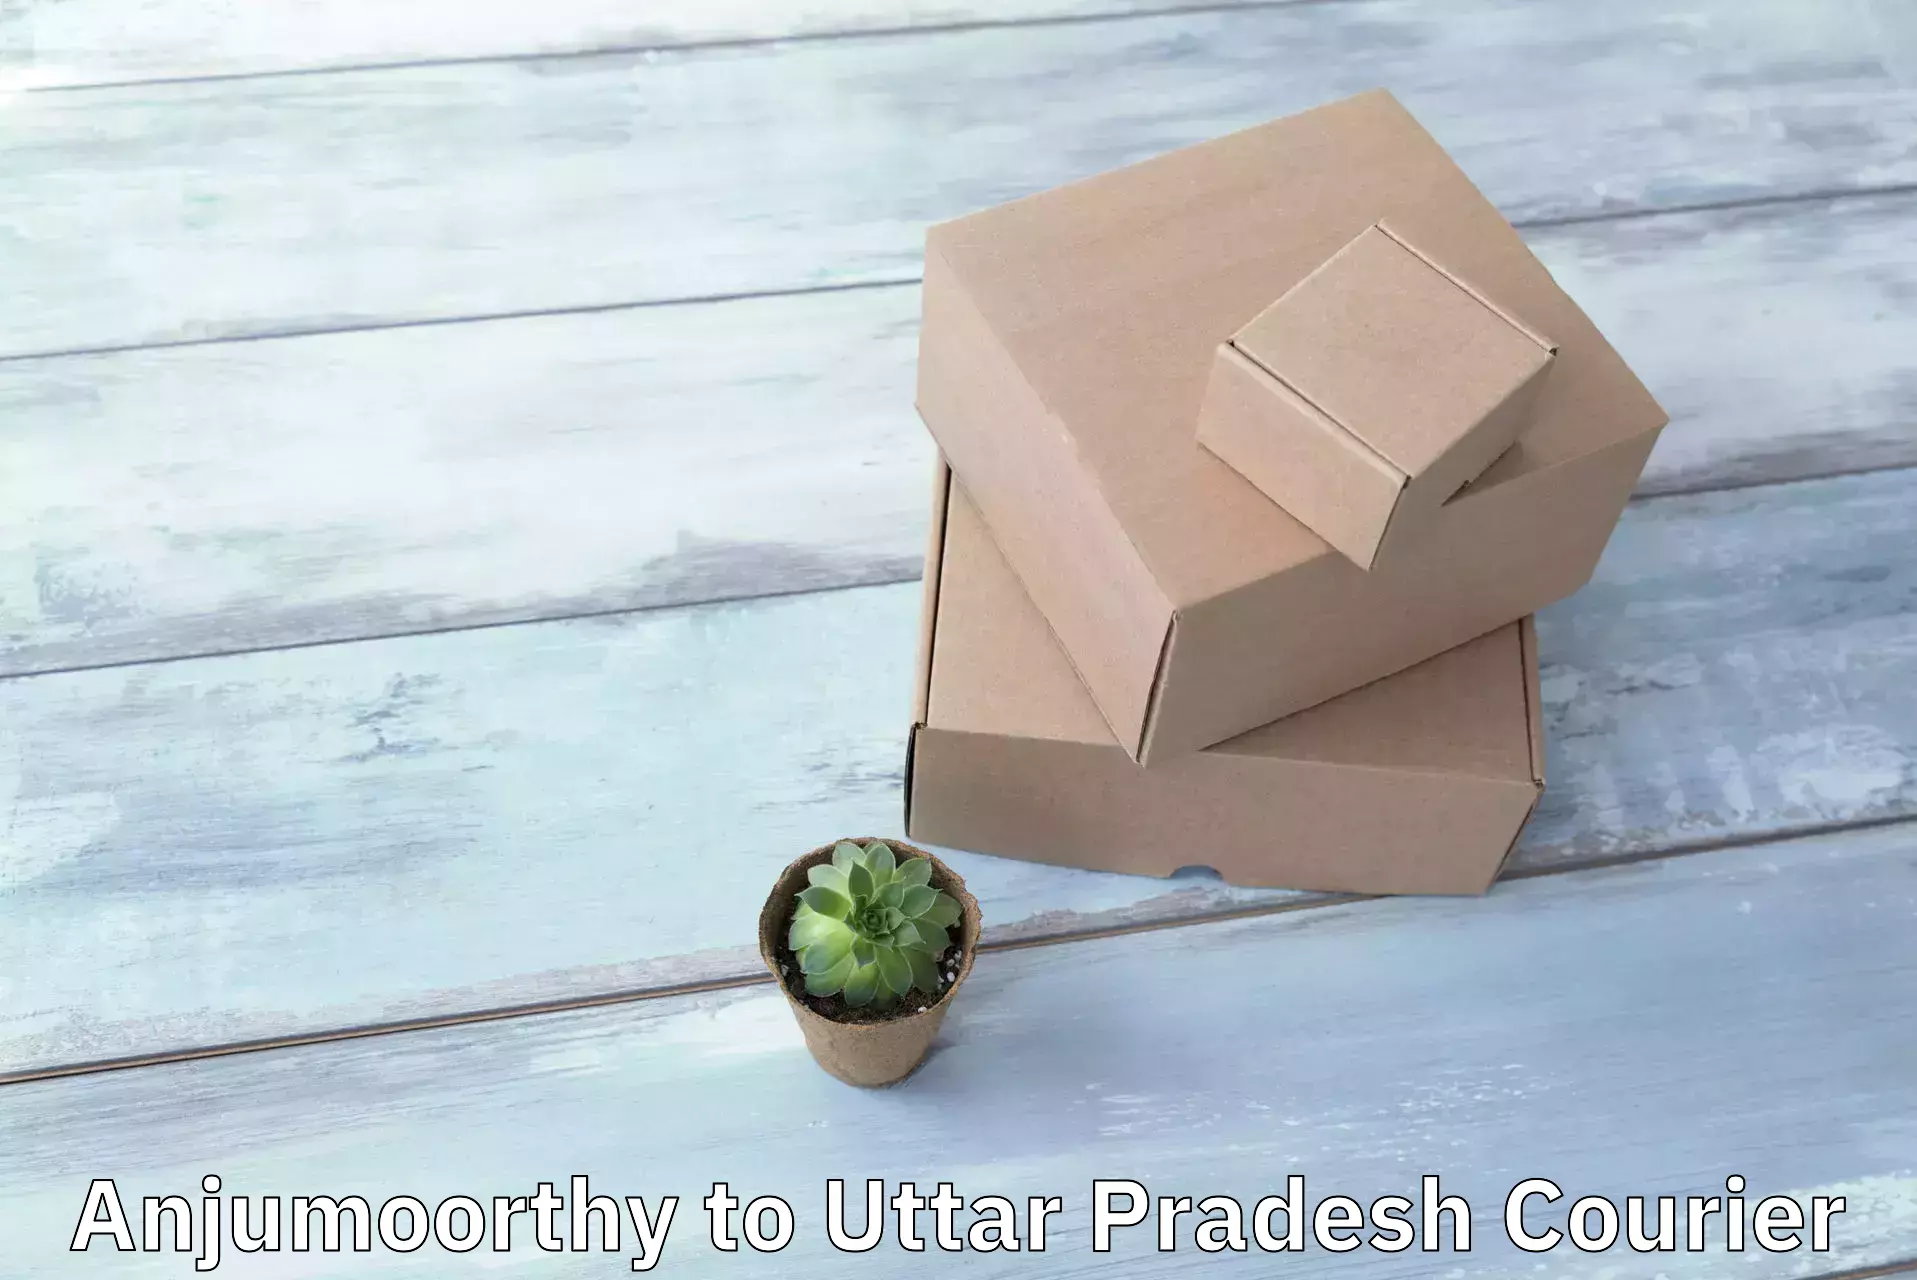 Custom courier packages Anjumoorthy to Agra